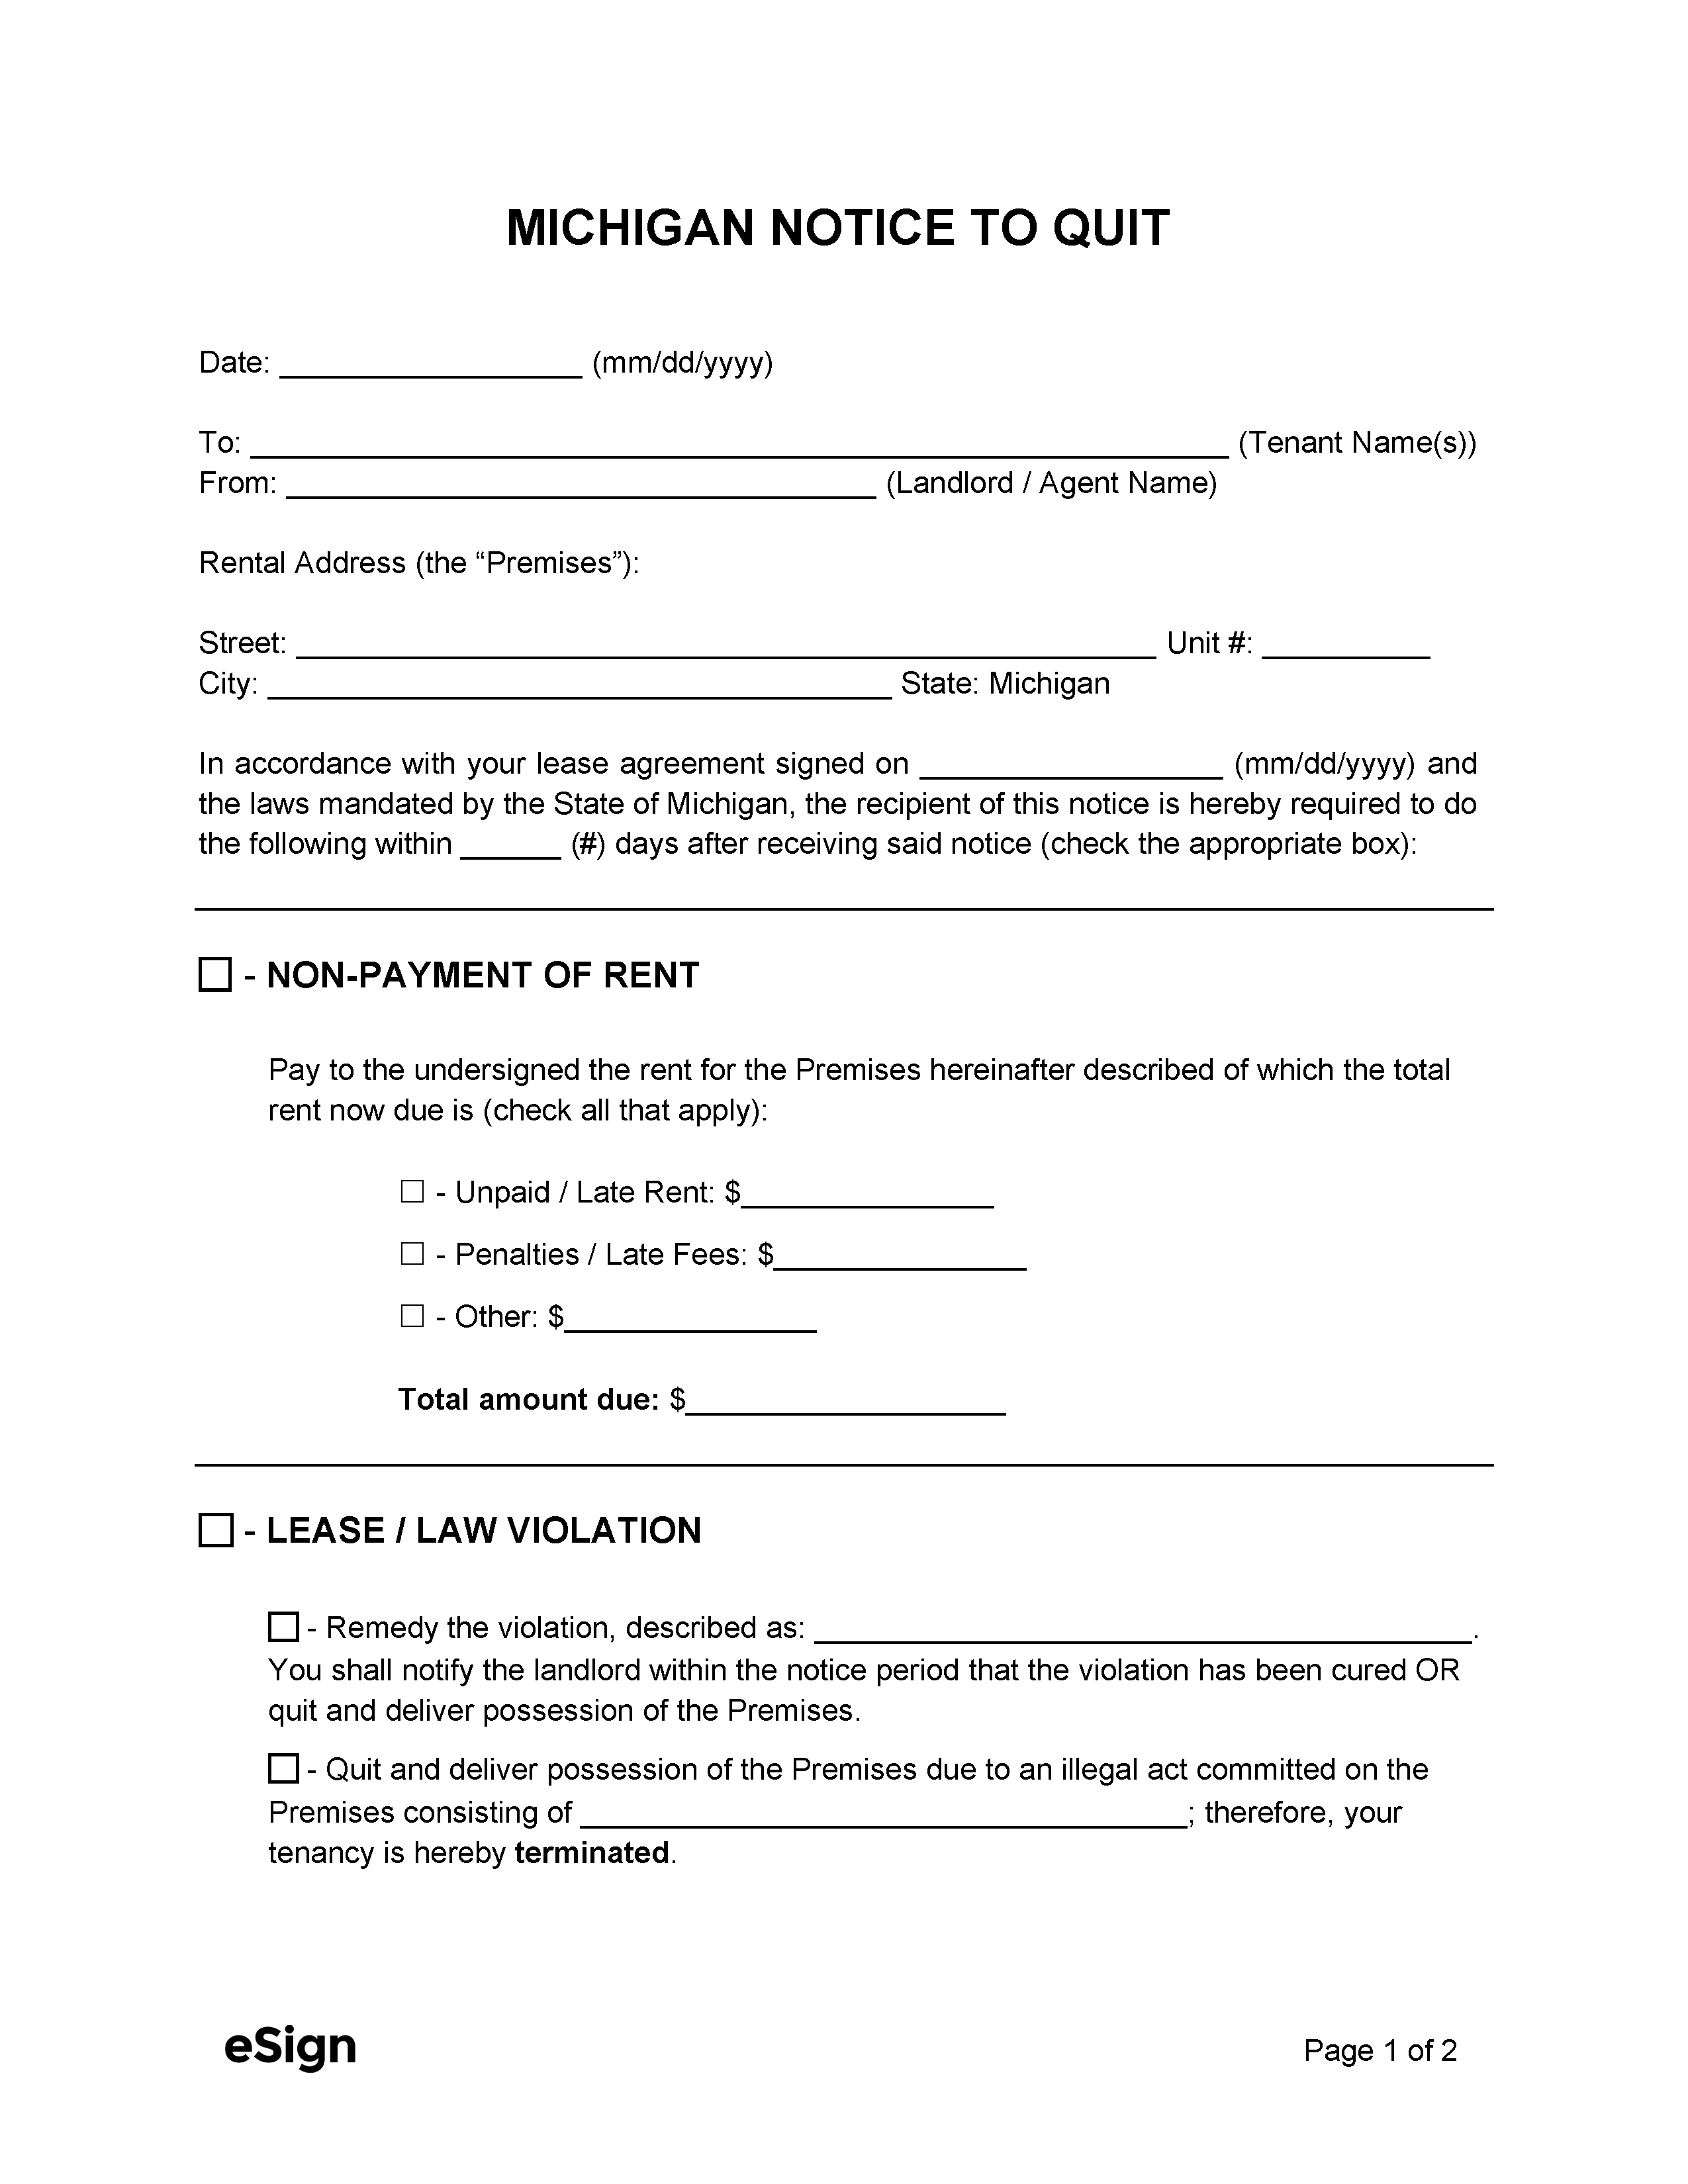 free michigan eviction notice templates laws pdf word